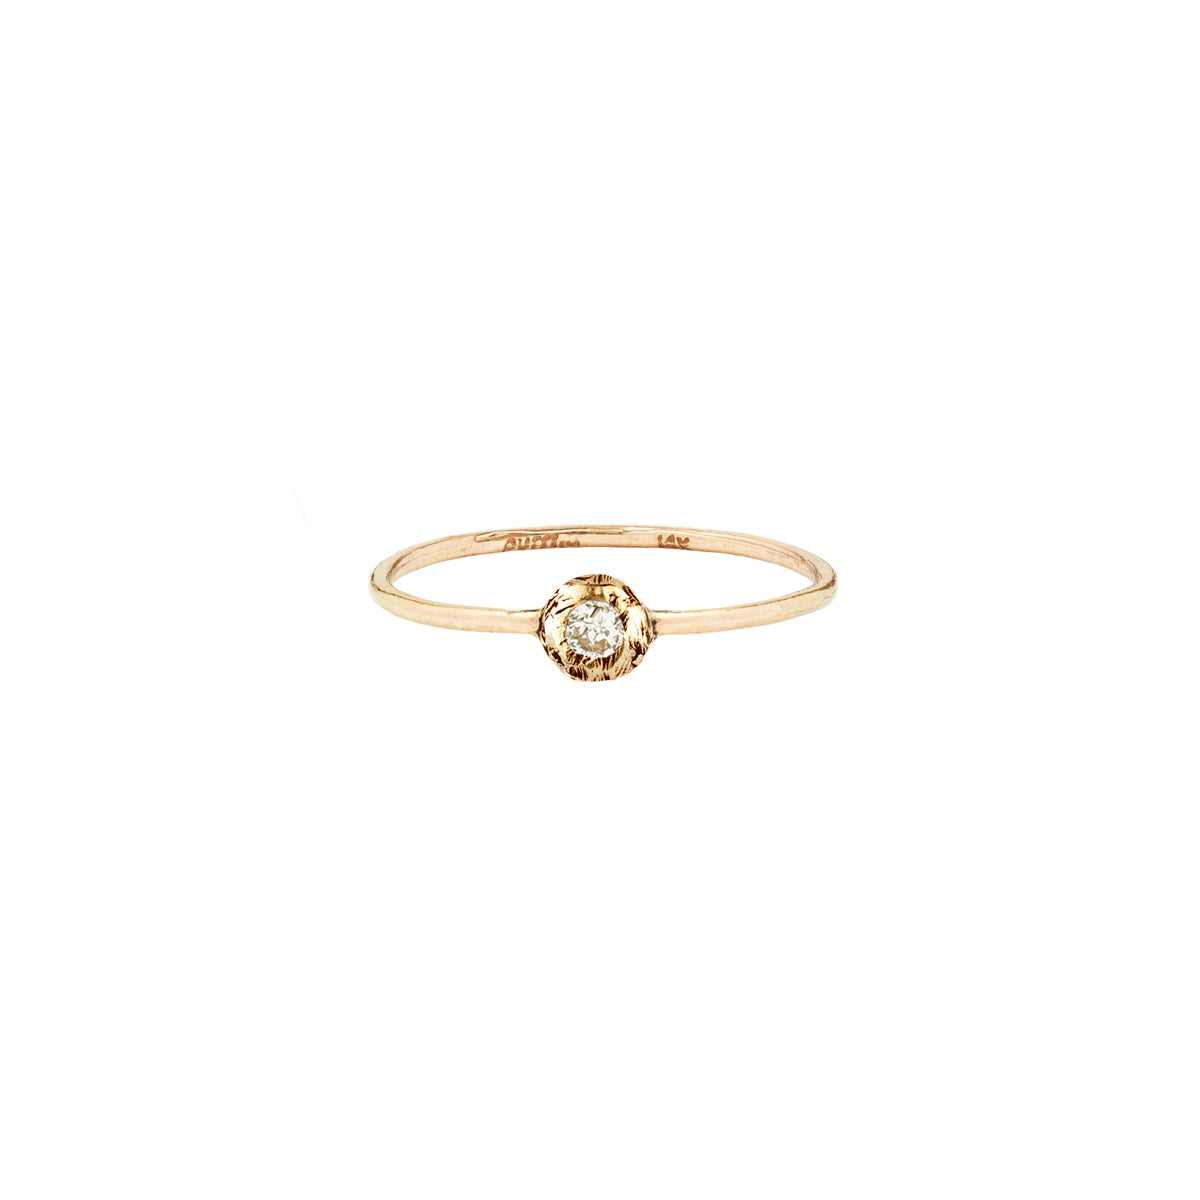 A 14k gold ring featuring a gold set white diamond.